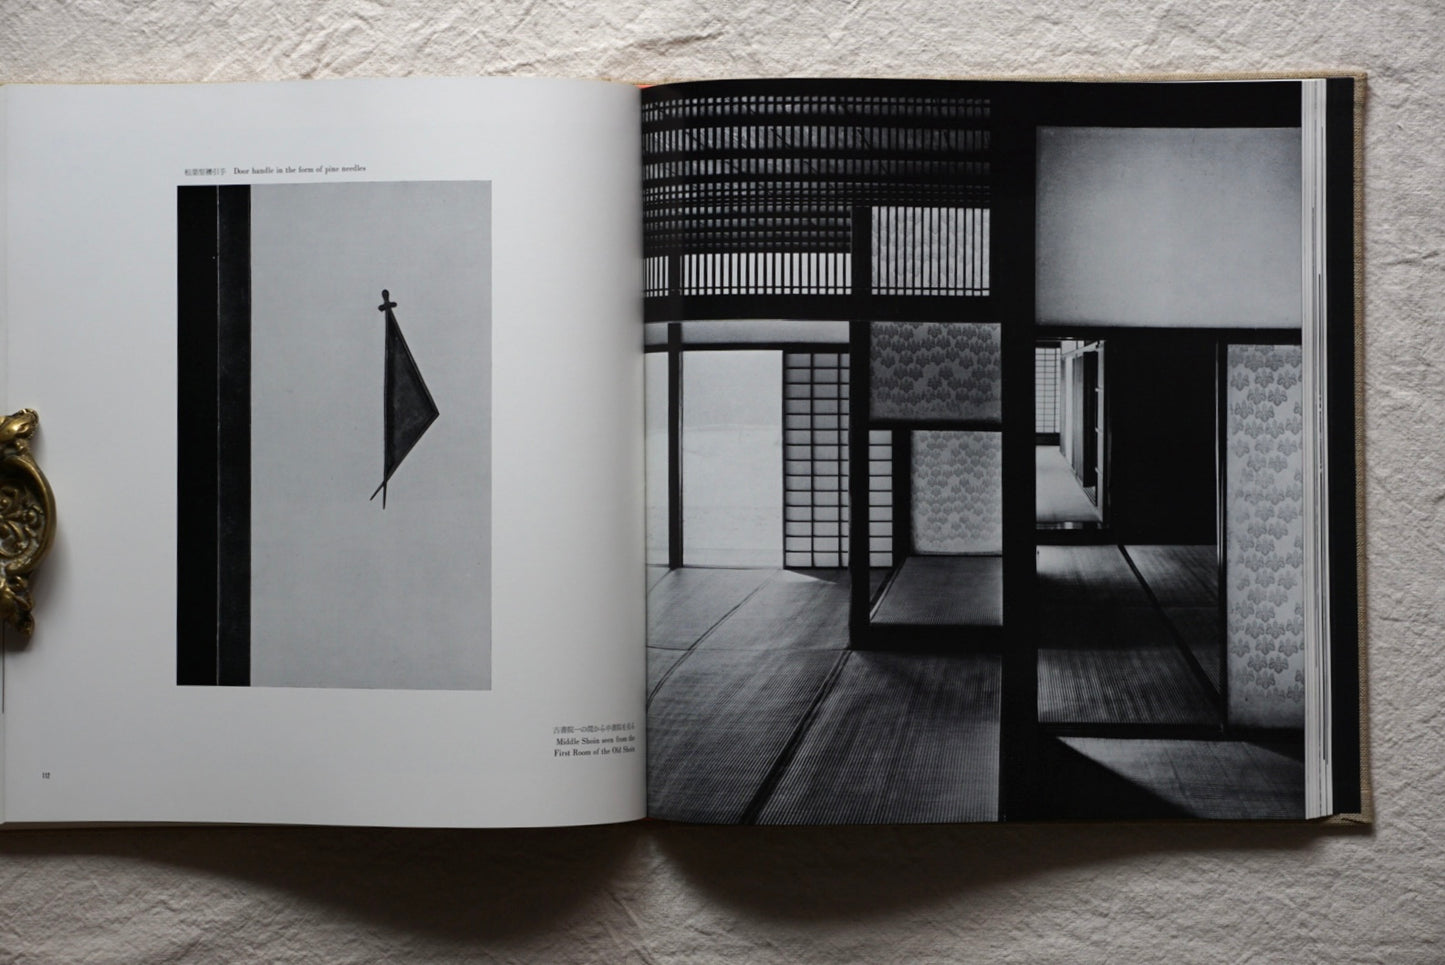 Katsura: Tradition and Creativity in Japanese Architecture